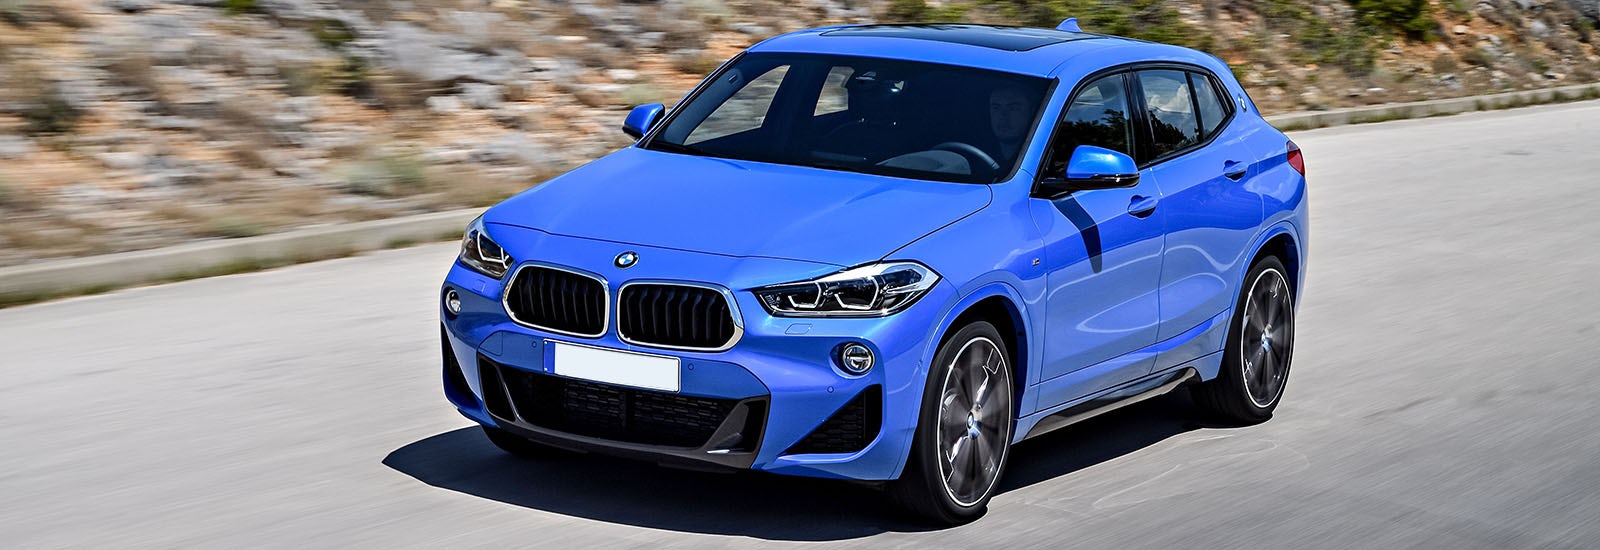 2018 BMW X2 SUV price, specs and release date | carwow